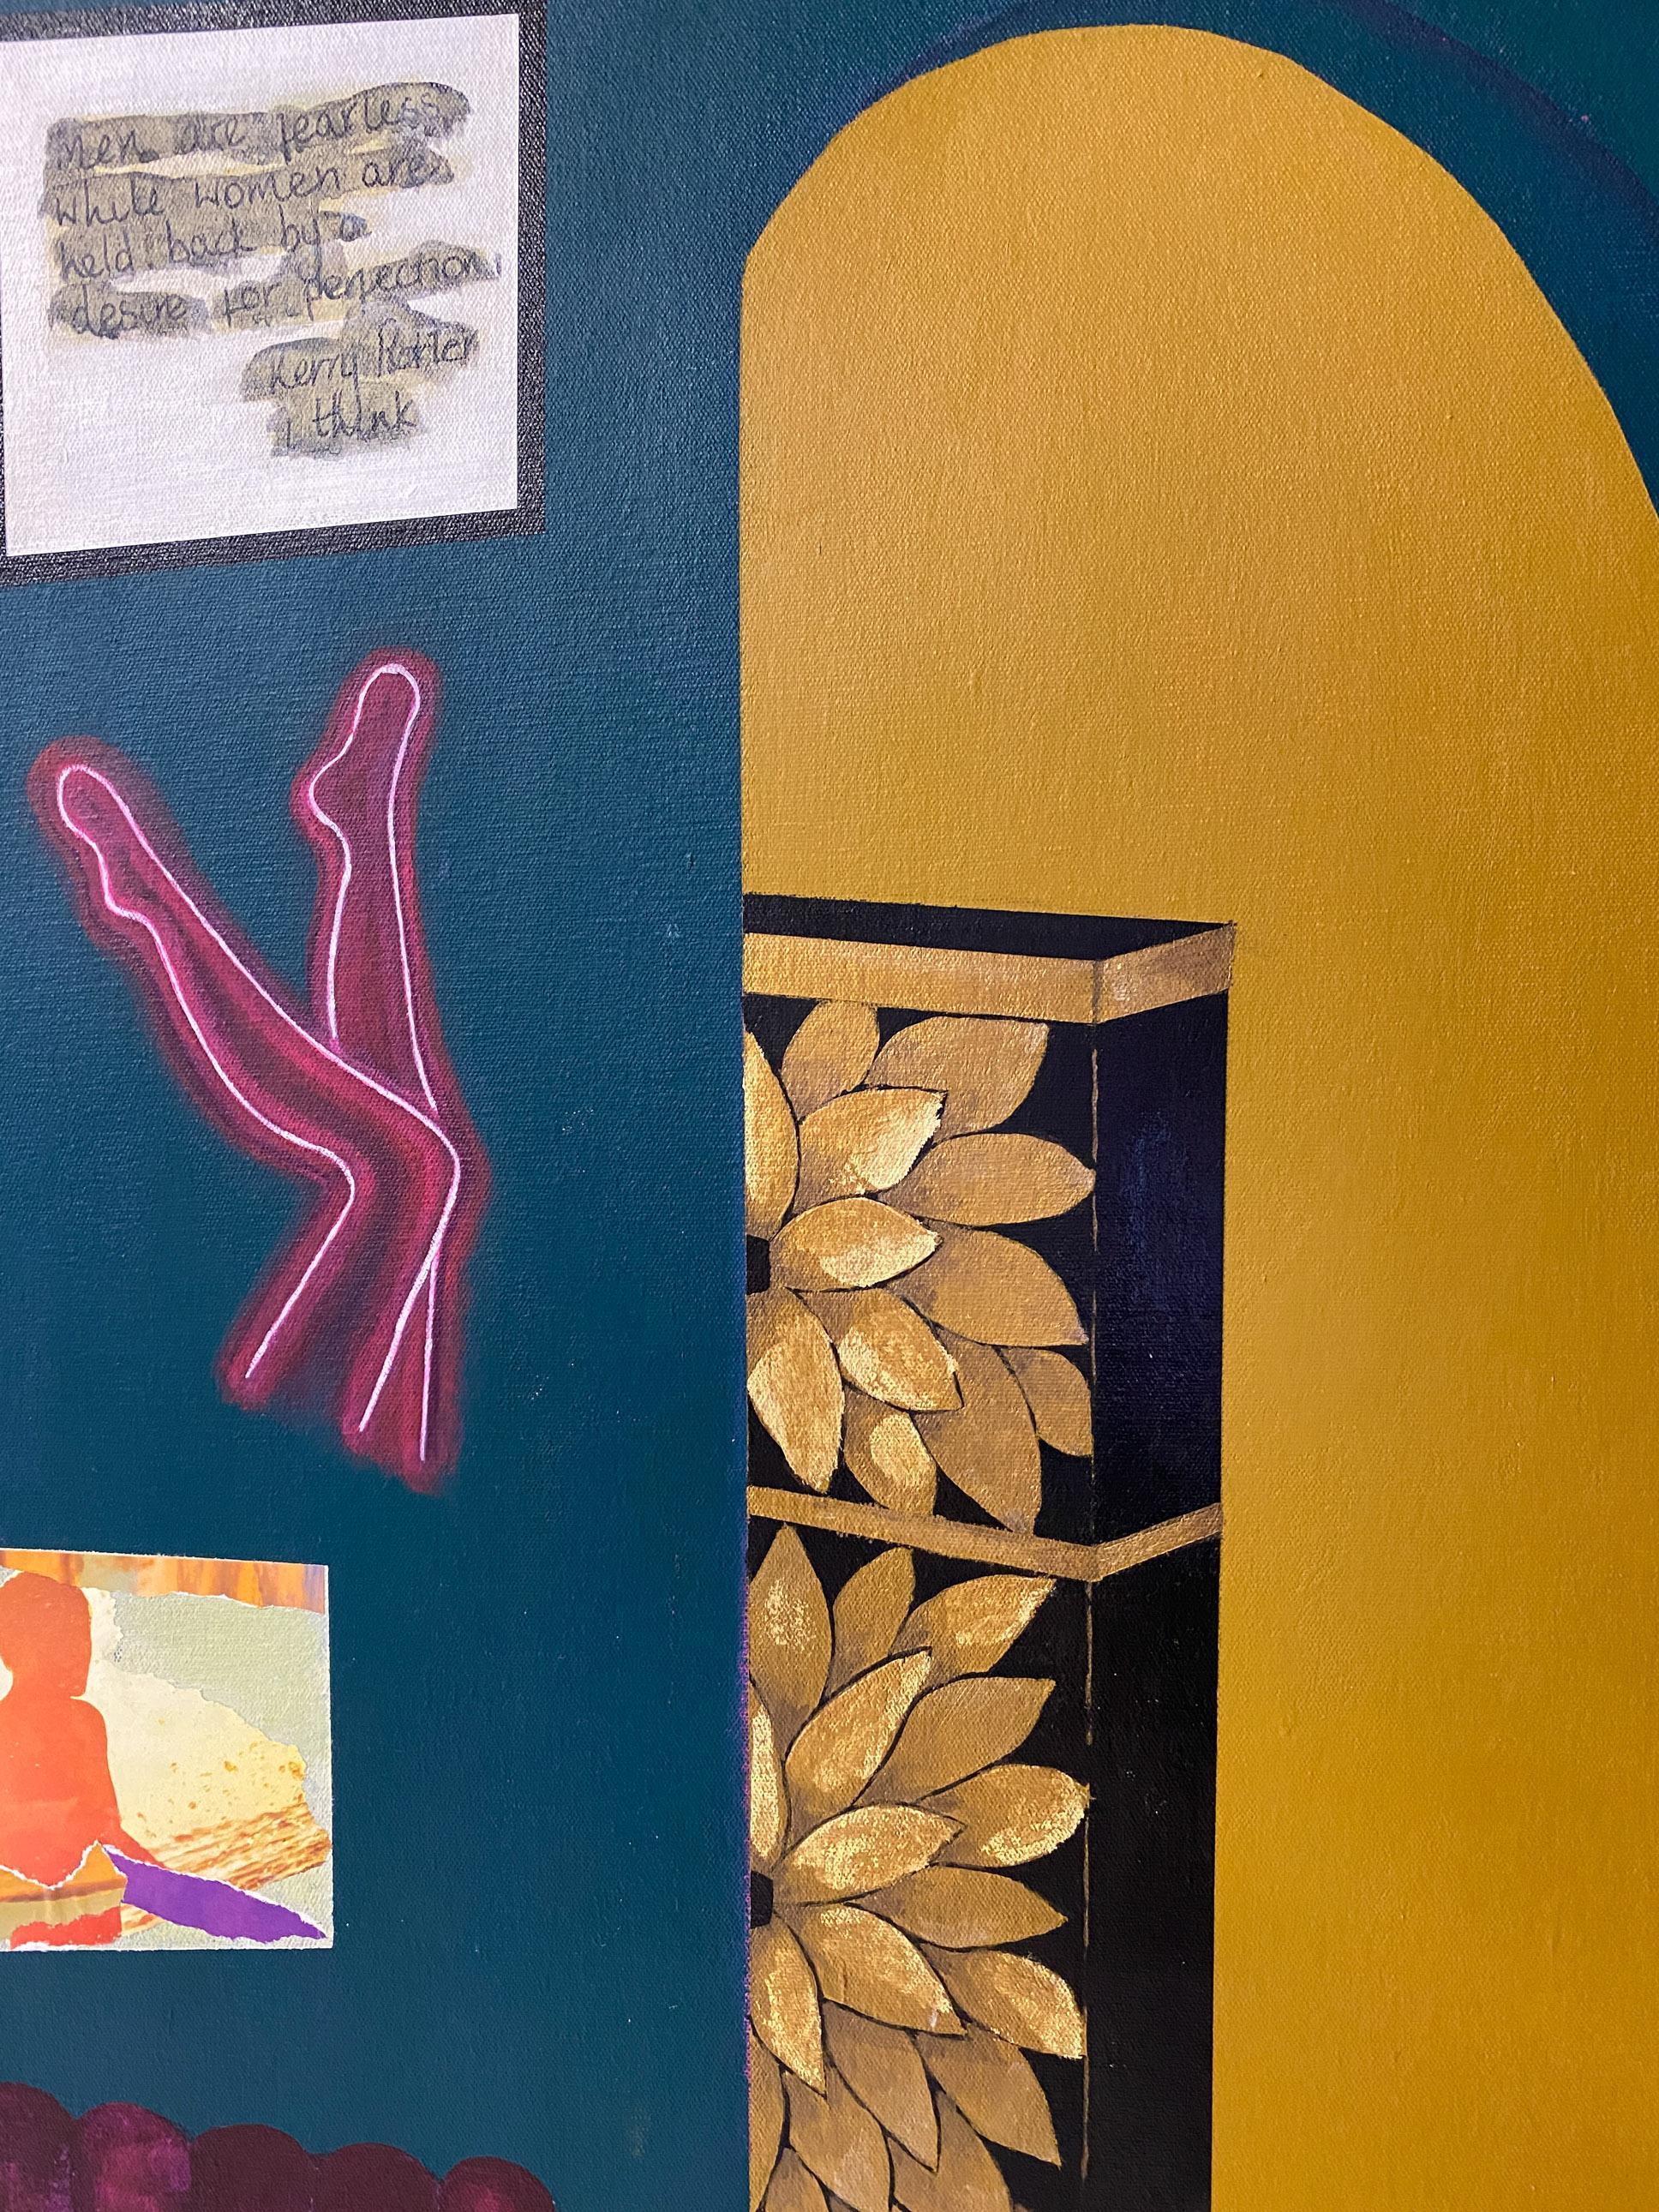 Acrylic, charcoal, spray paint, collage, bronze and gold leaf on canvas.

Dawn Beckles’ use of paint, print making and collage create bold depictions of the domestic: the exotic flora inspired by her native Barbados paralleled with found images of